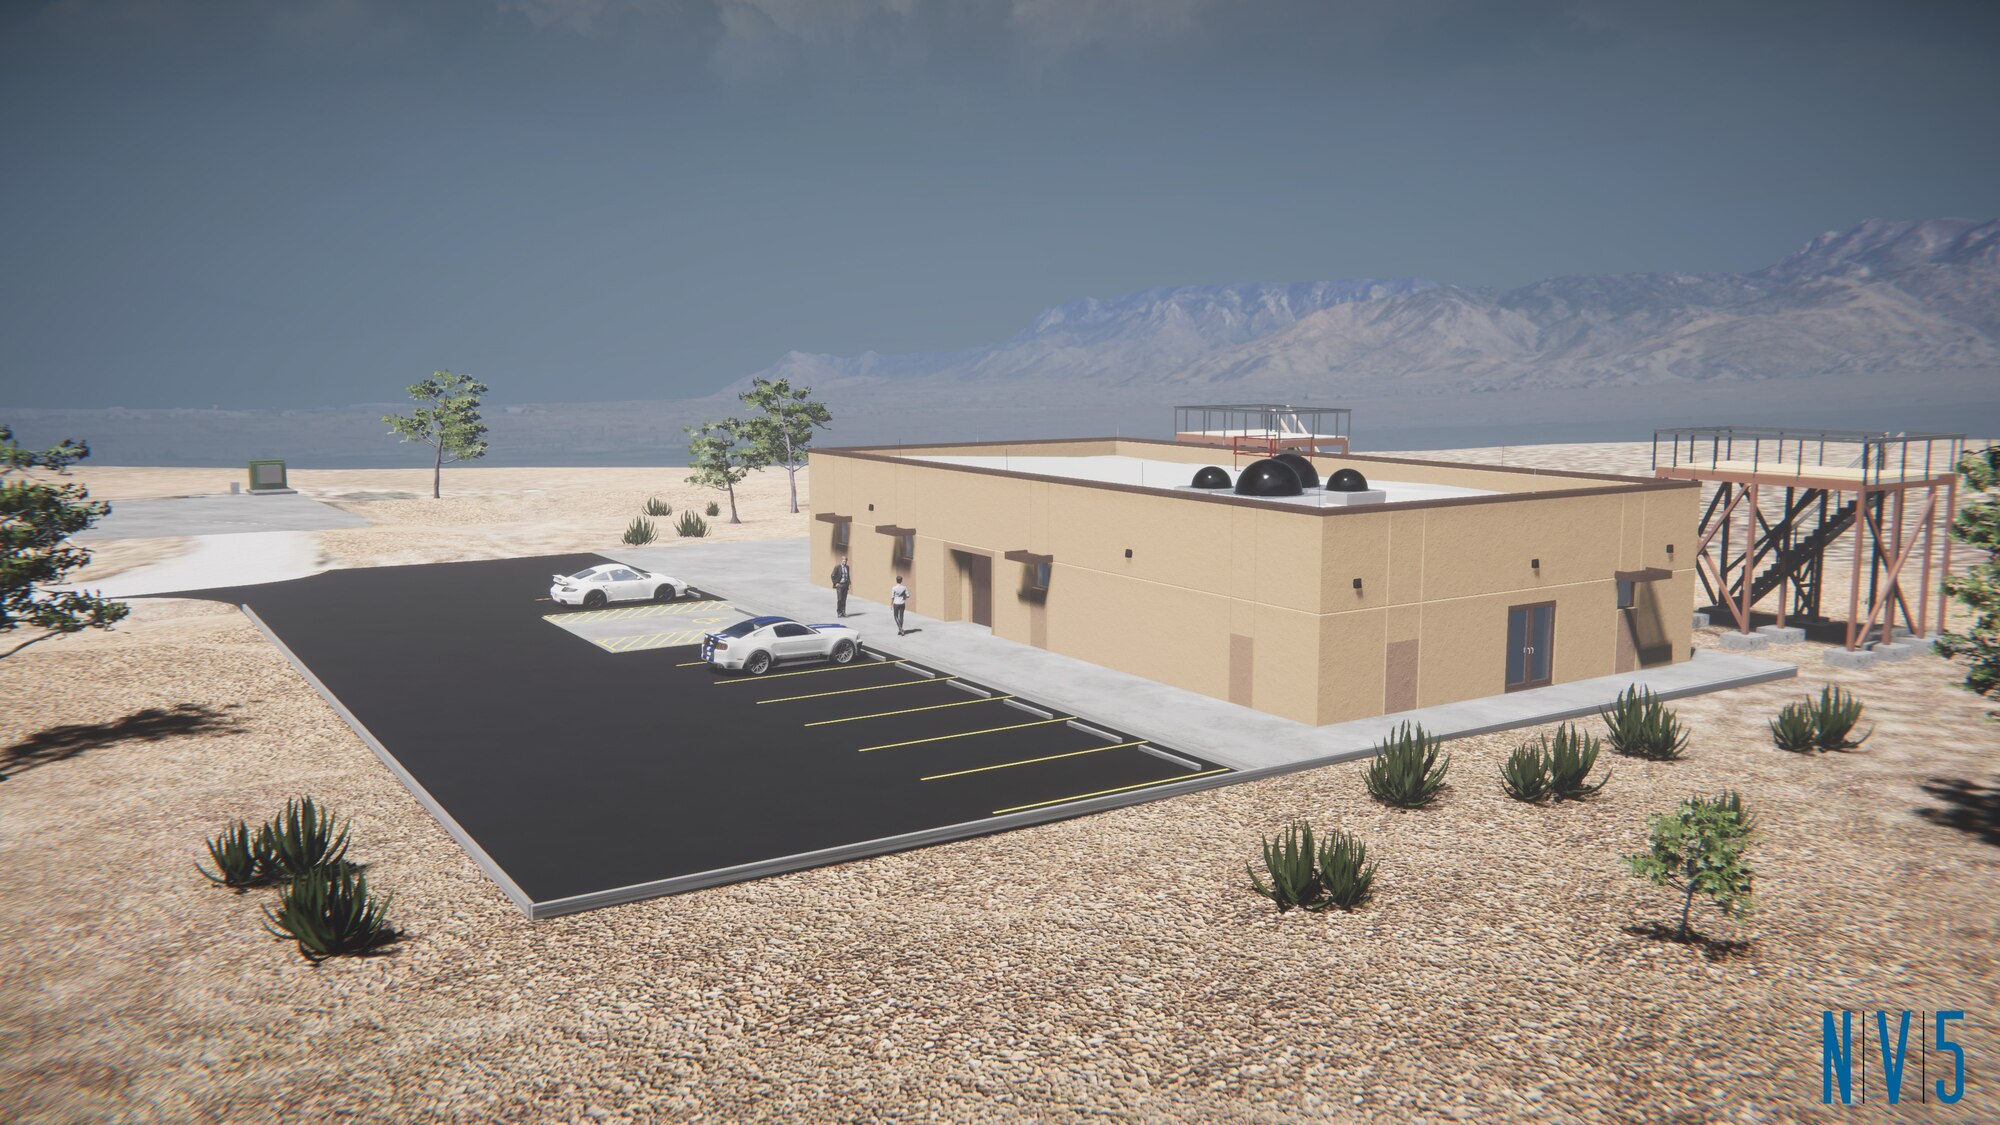 A rendering of the Air Force Research Laboratory's Skyway Technology Laboratory that will be constructed on Kirtland AFB, N.M. The AFRL Space Vehicles Directorate held a groundbreaking ceremony March 16. The construction contractor is QA Engineering and architectural contractor is WHPacific, both of Albuquerque, N.M. The lab is projected for occupancy in early 2022. (Rendering/WHPacific)